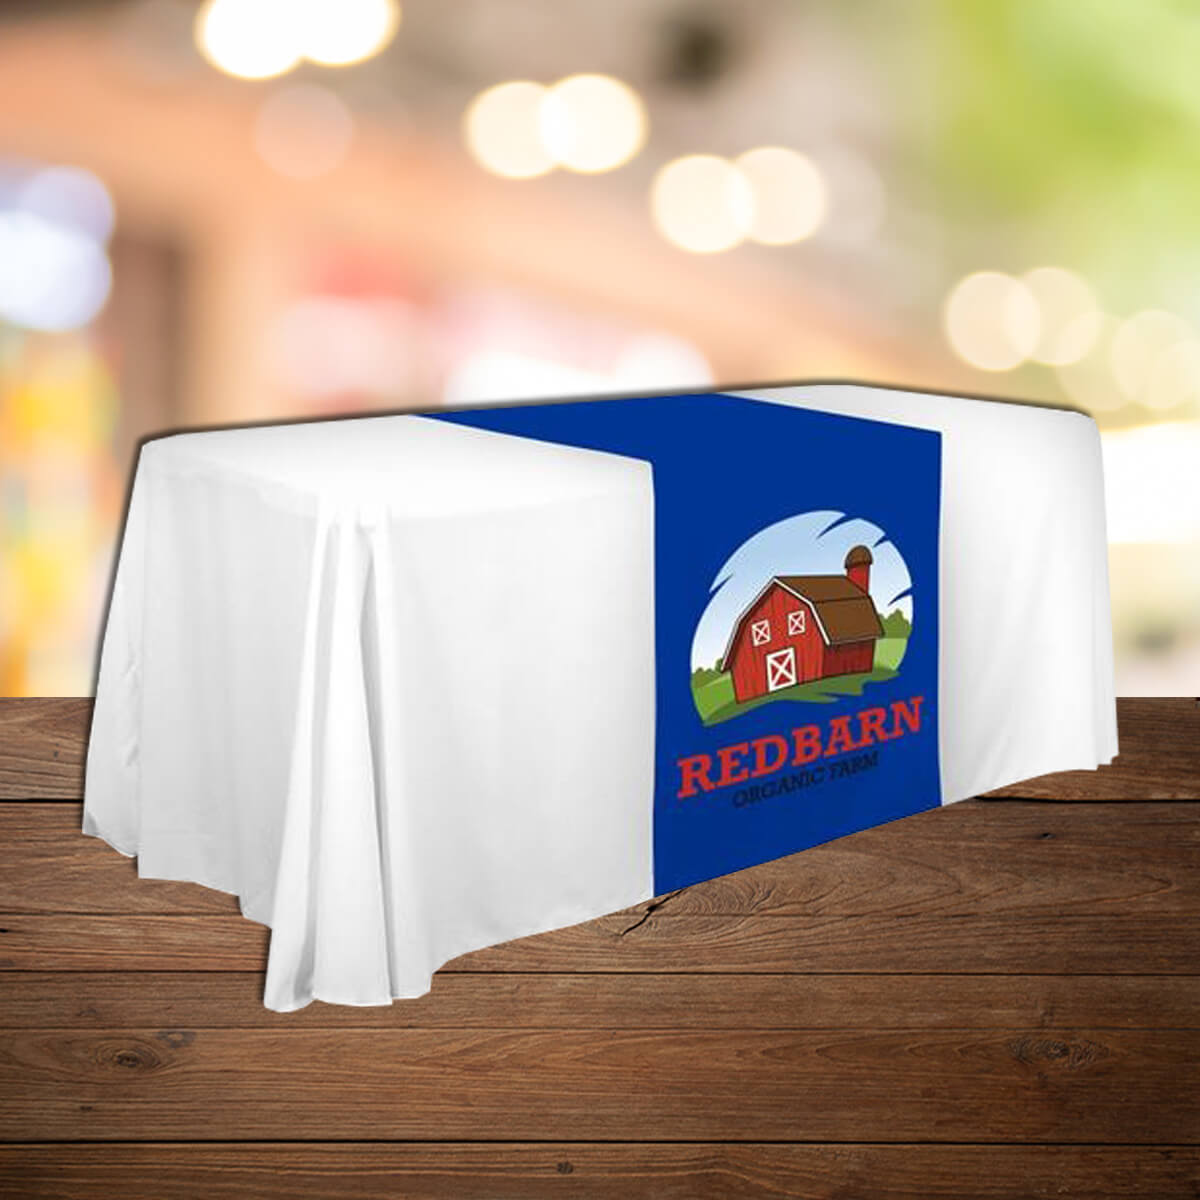 Farm table runner display exhibit trade show by Curative Printing